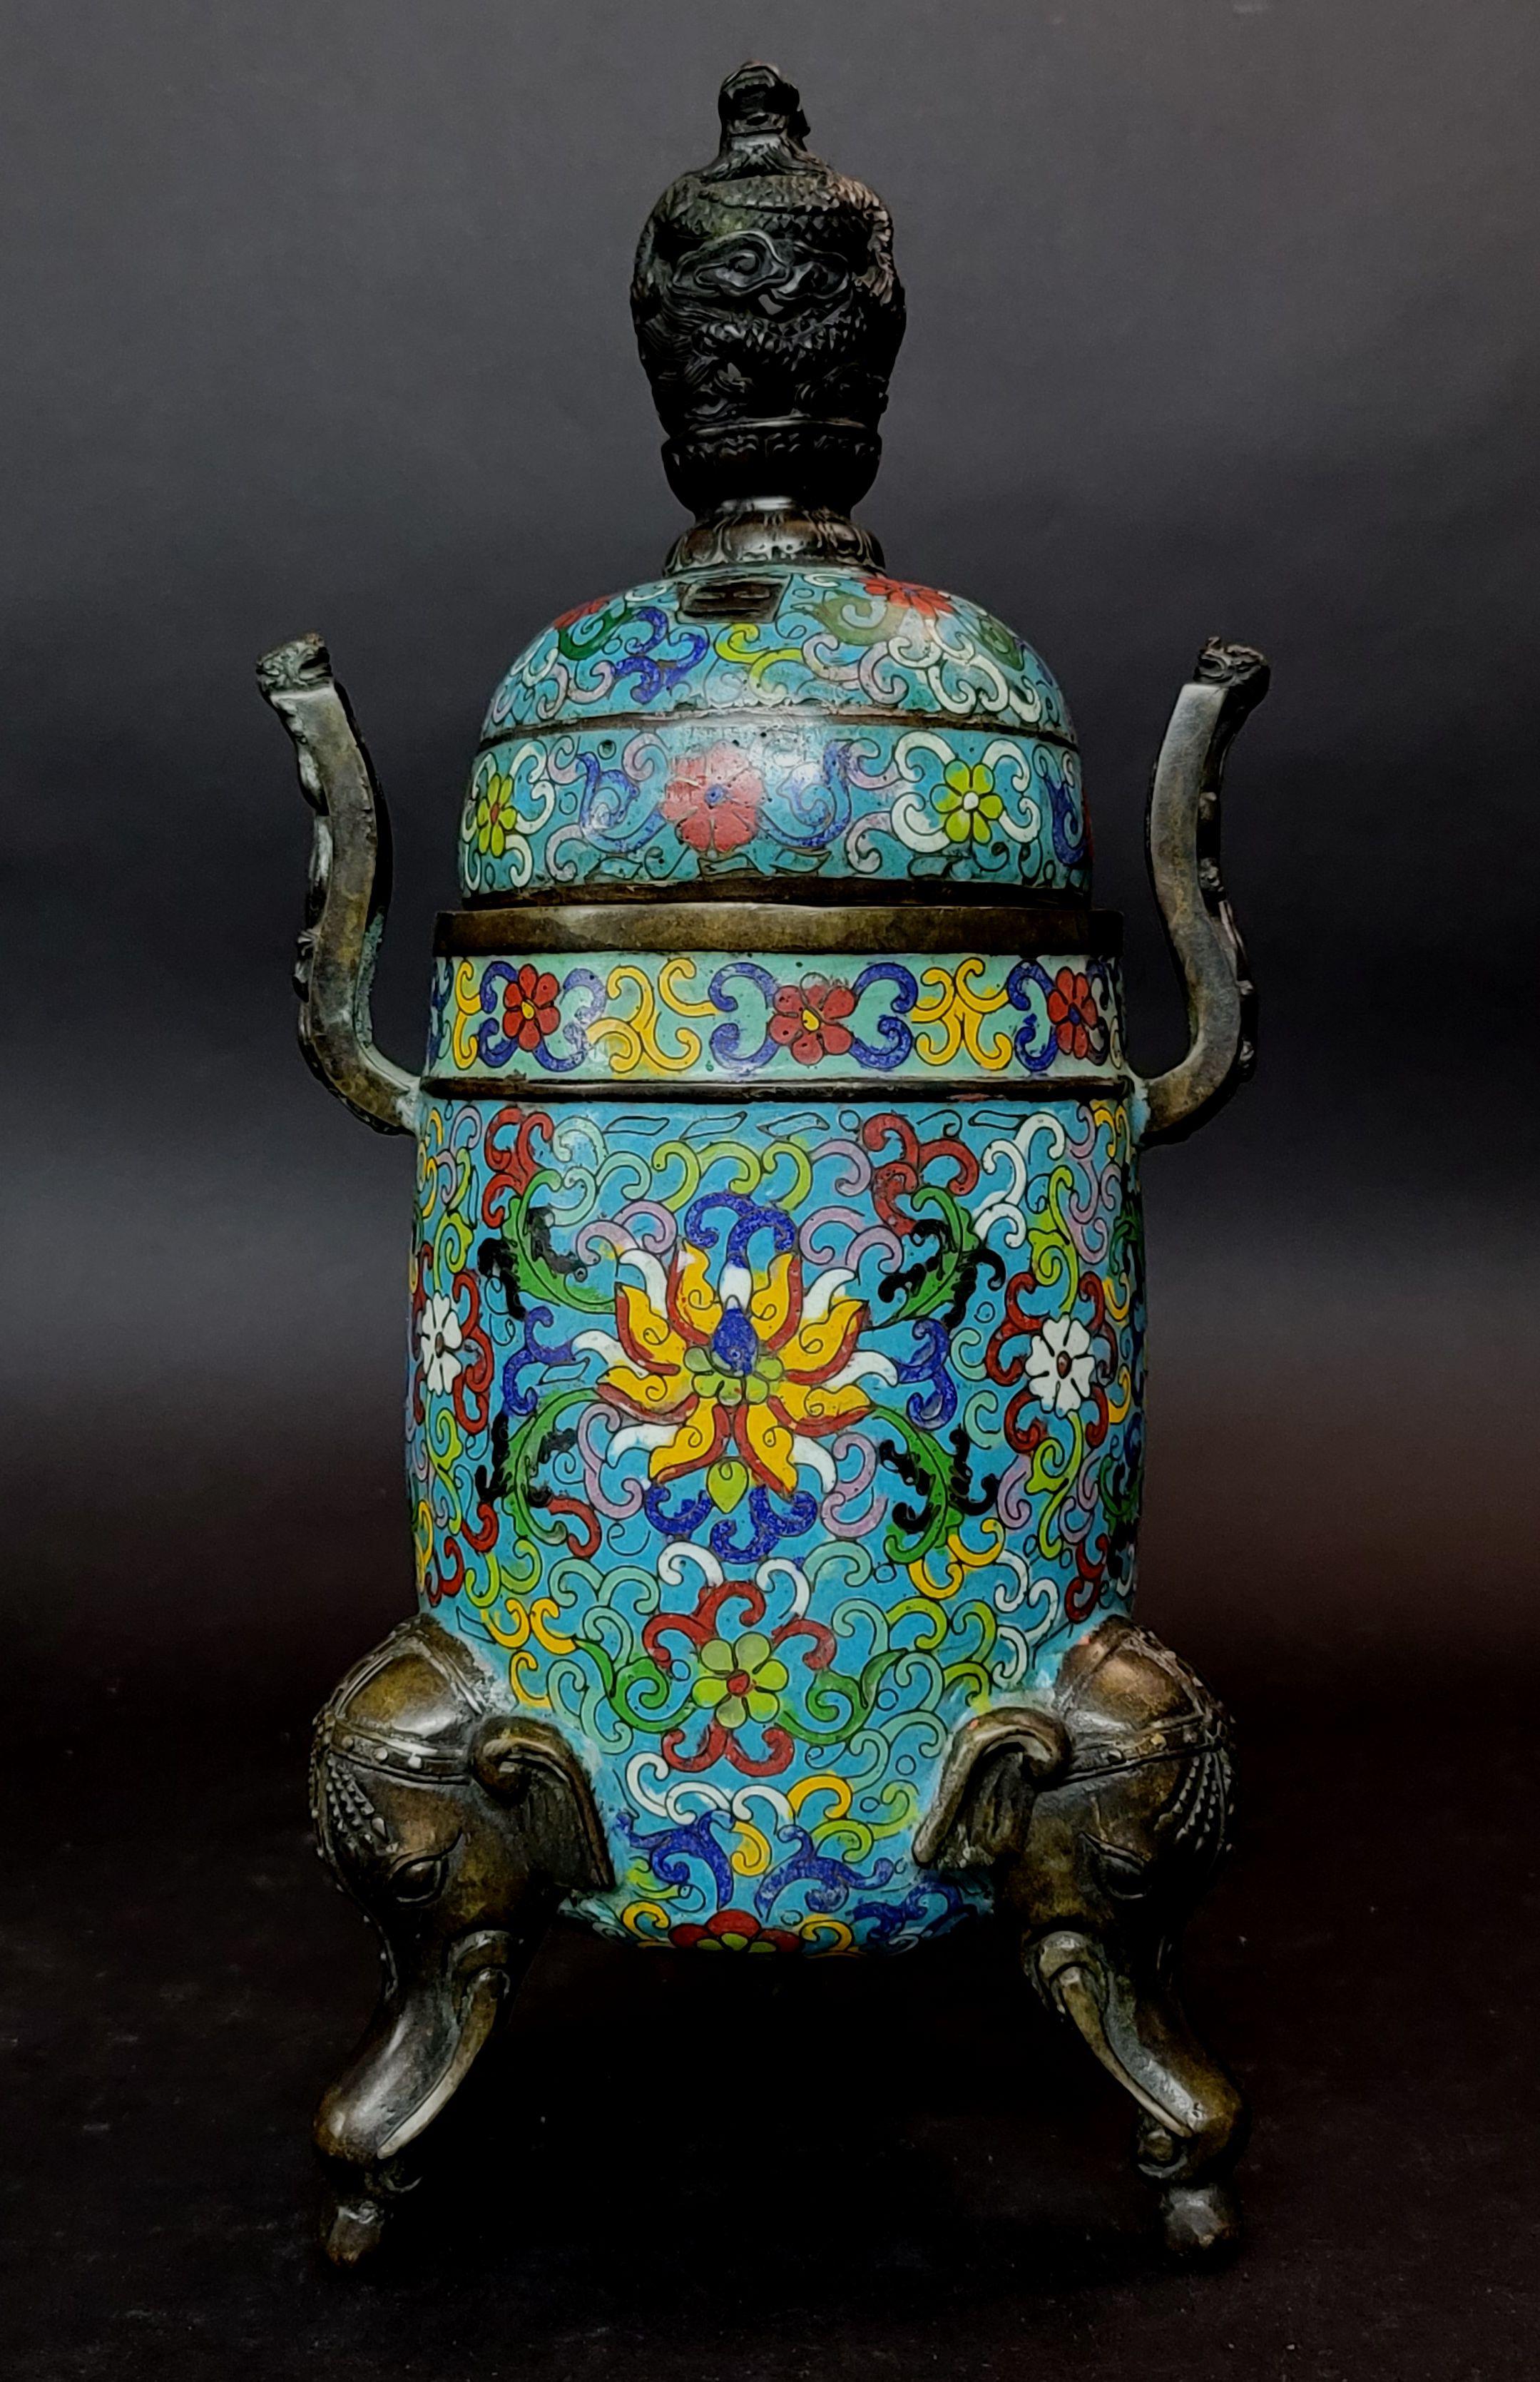 Chinese Cloisonne Tripod incense holder having bronze of 3 elephant heads form the feet, dragon form handles on two sides and a big dragon head finial, along with a removable, pierced cover, marked to the underside, overall height 14 inches.